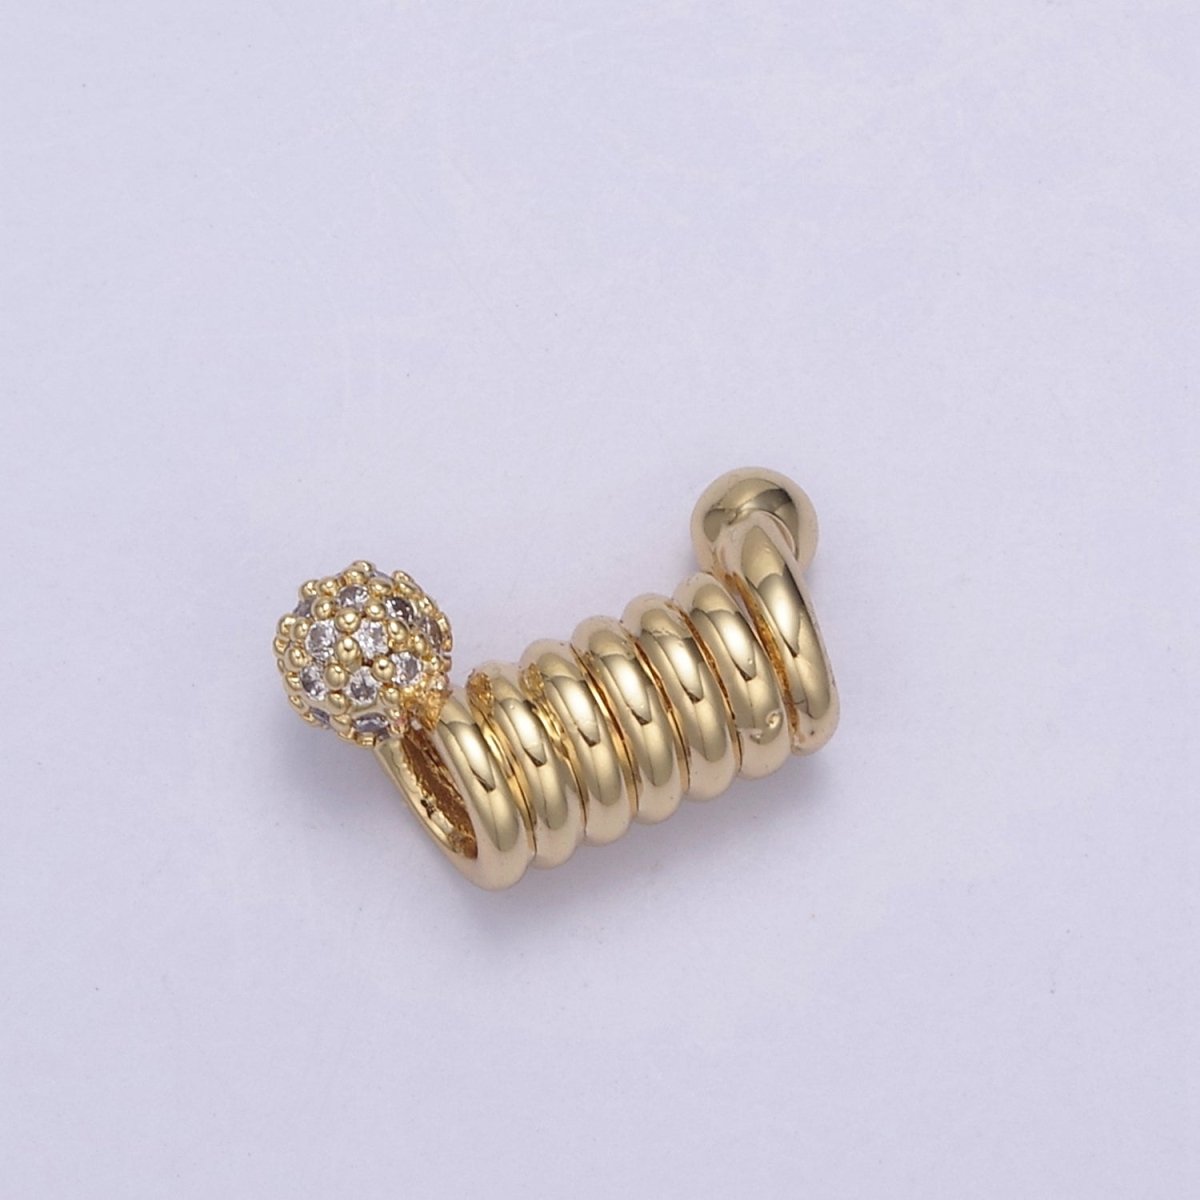 Spiral Tube Bead, Pave Round Spiral 14k Gold Filled Slider CZ Micro Pave Spiral Tube Spacer, DIY, Jewelry Making B-458 B-459 - DLUXCA